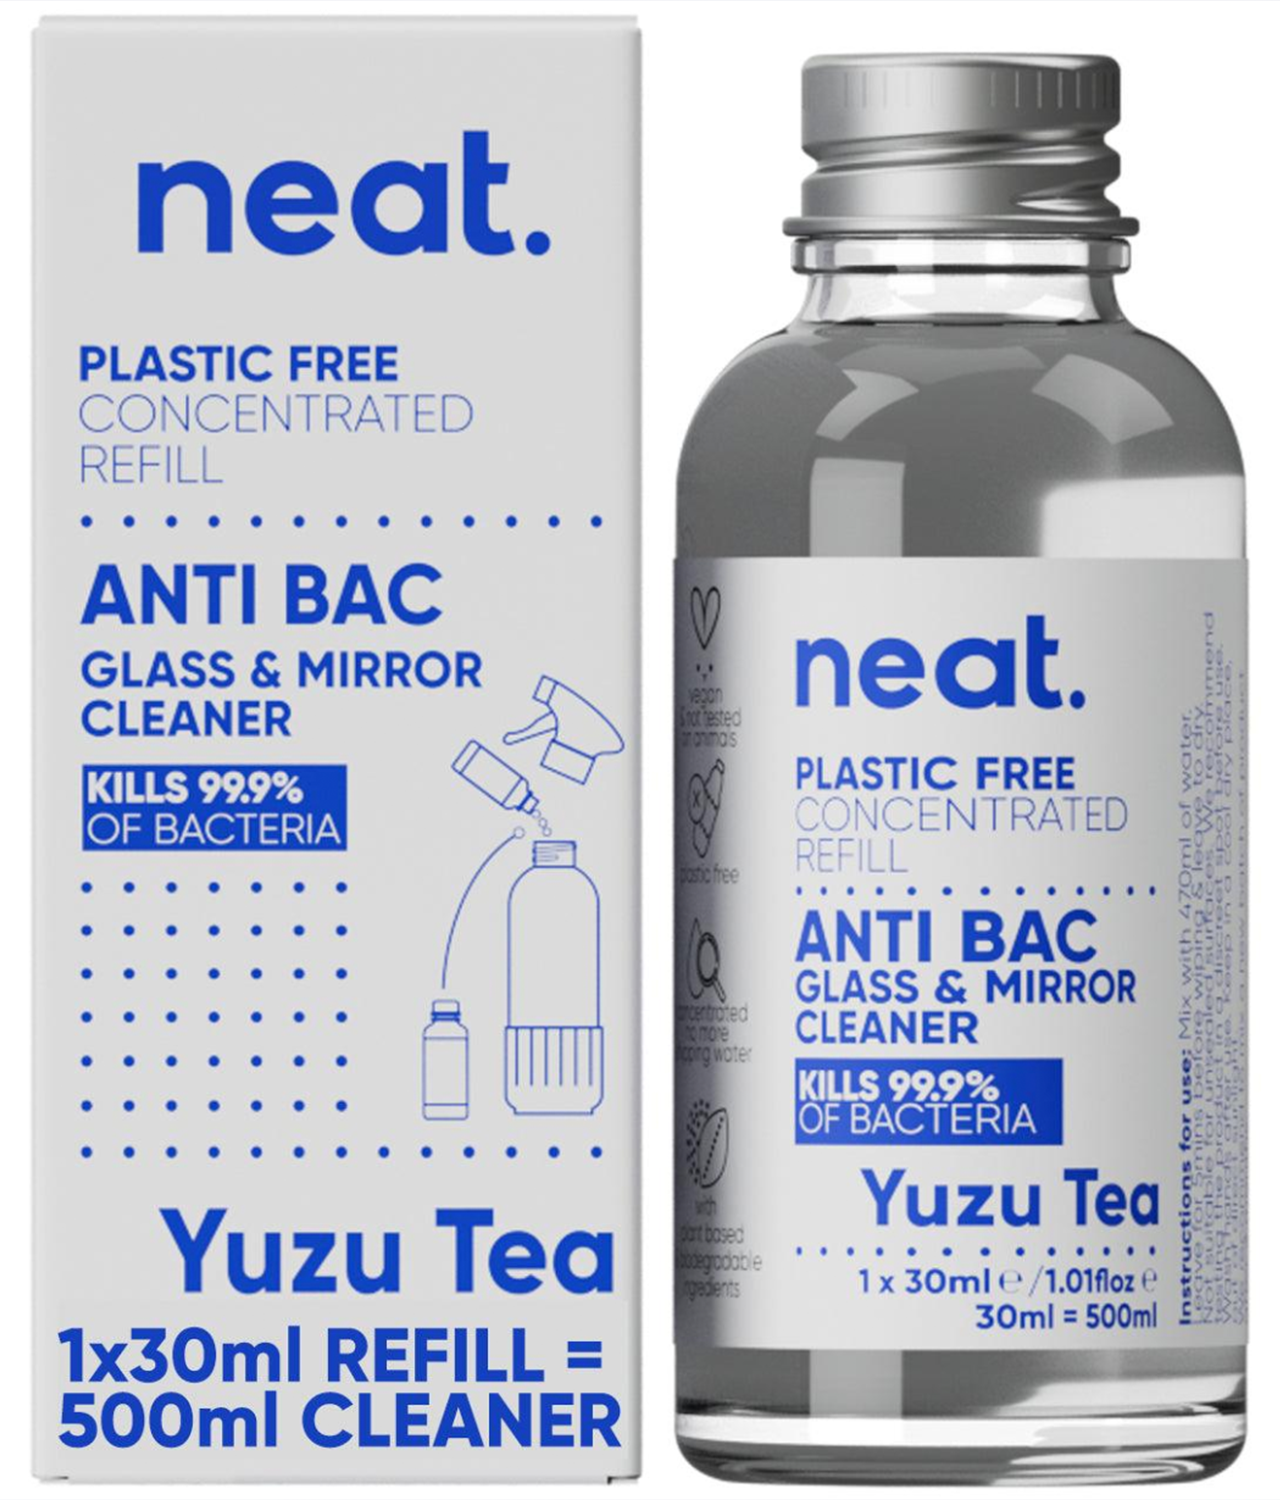 Neat Anti-Bac Glass & Mirror Cleaner